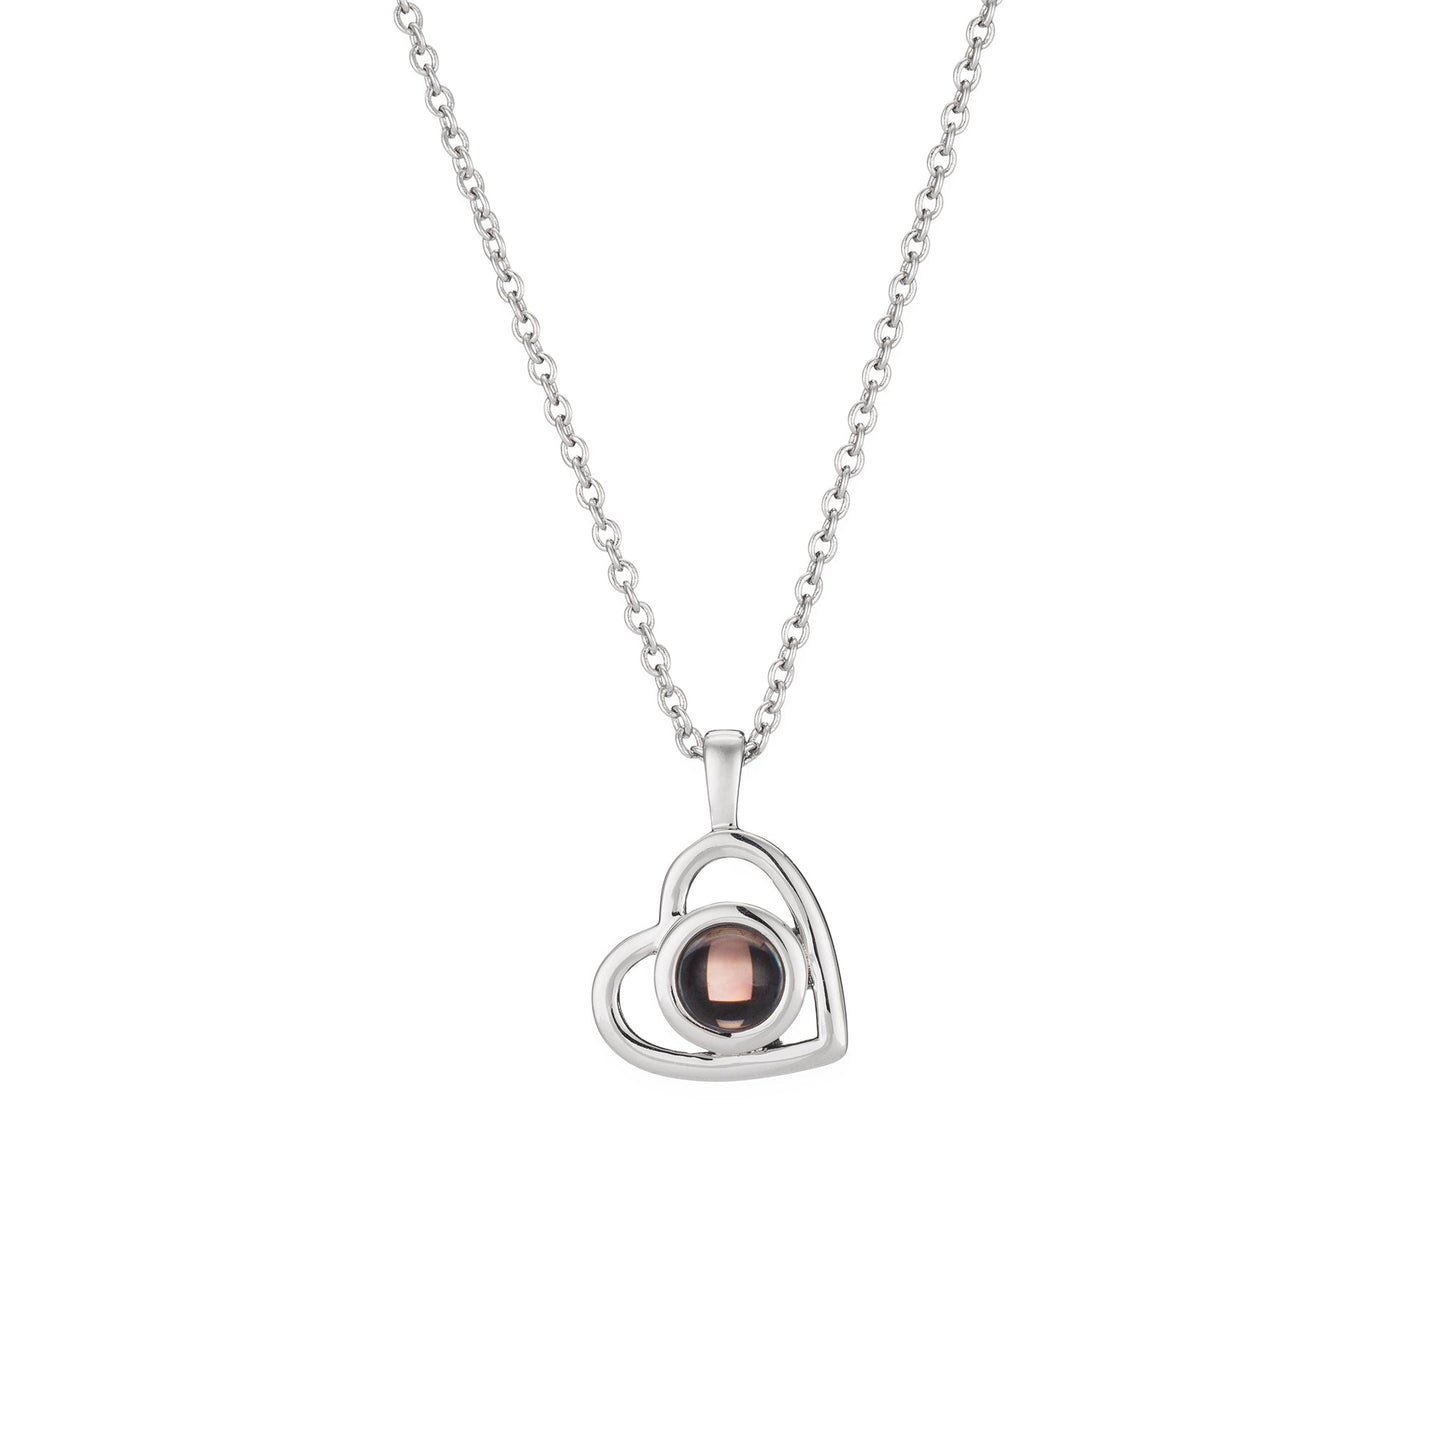 Endearing Memories: Customized Memory Locket Necklace